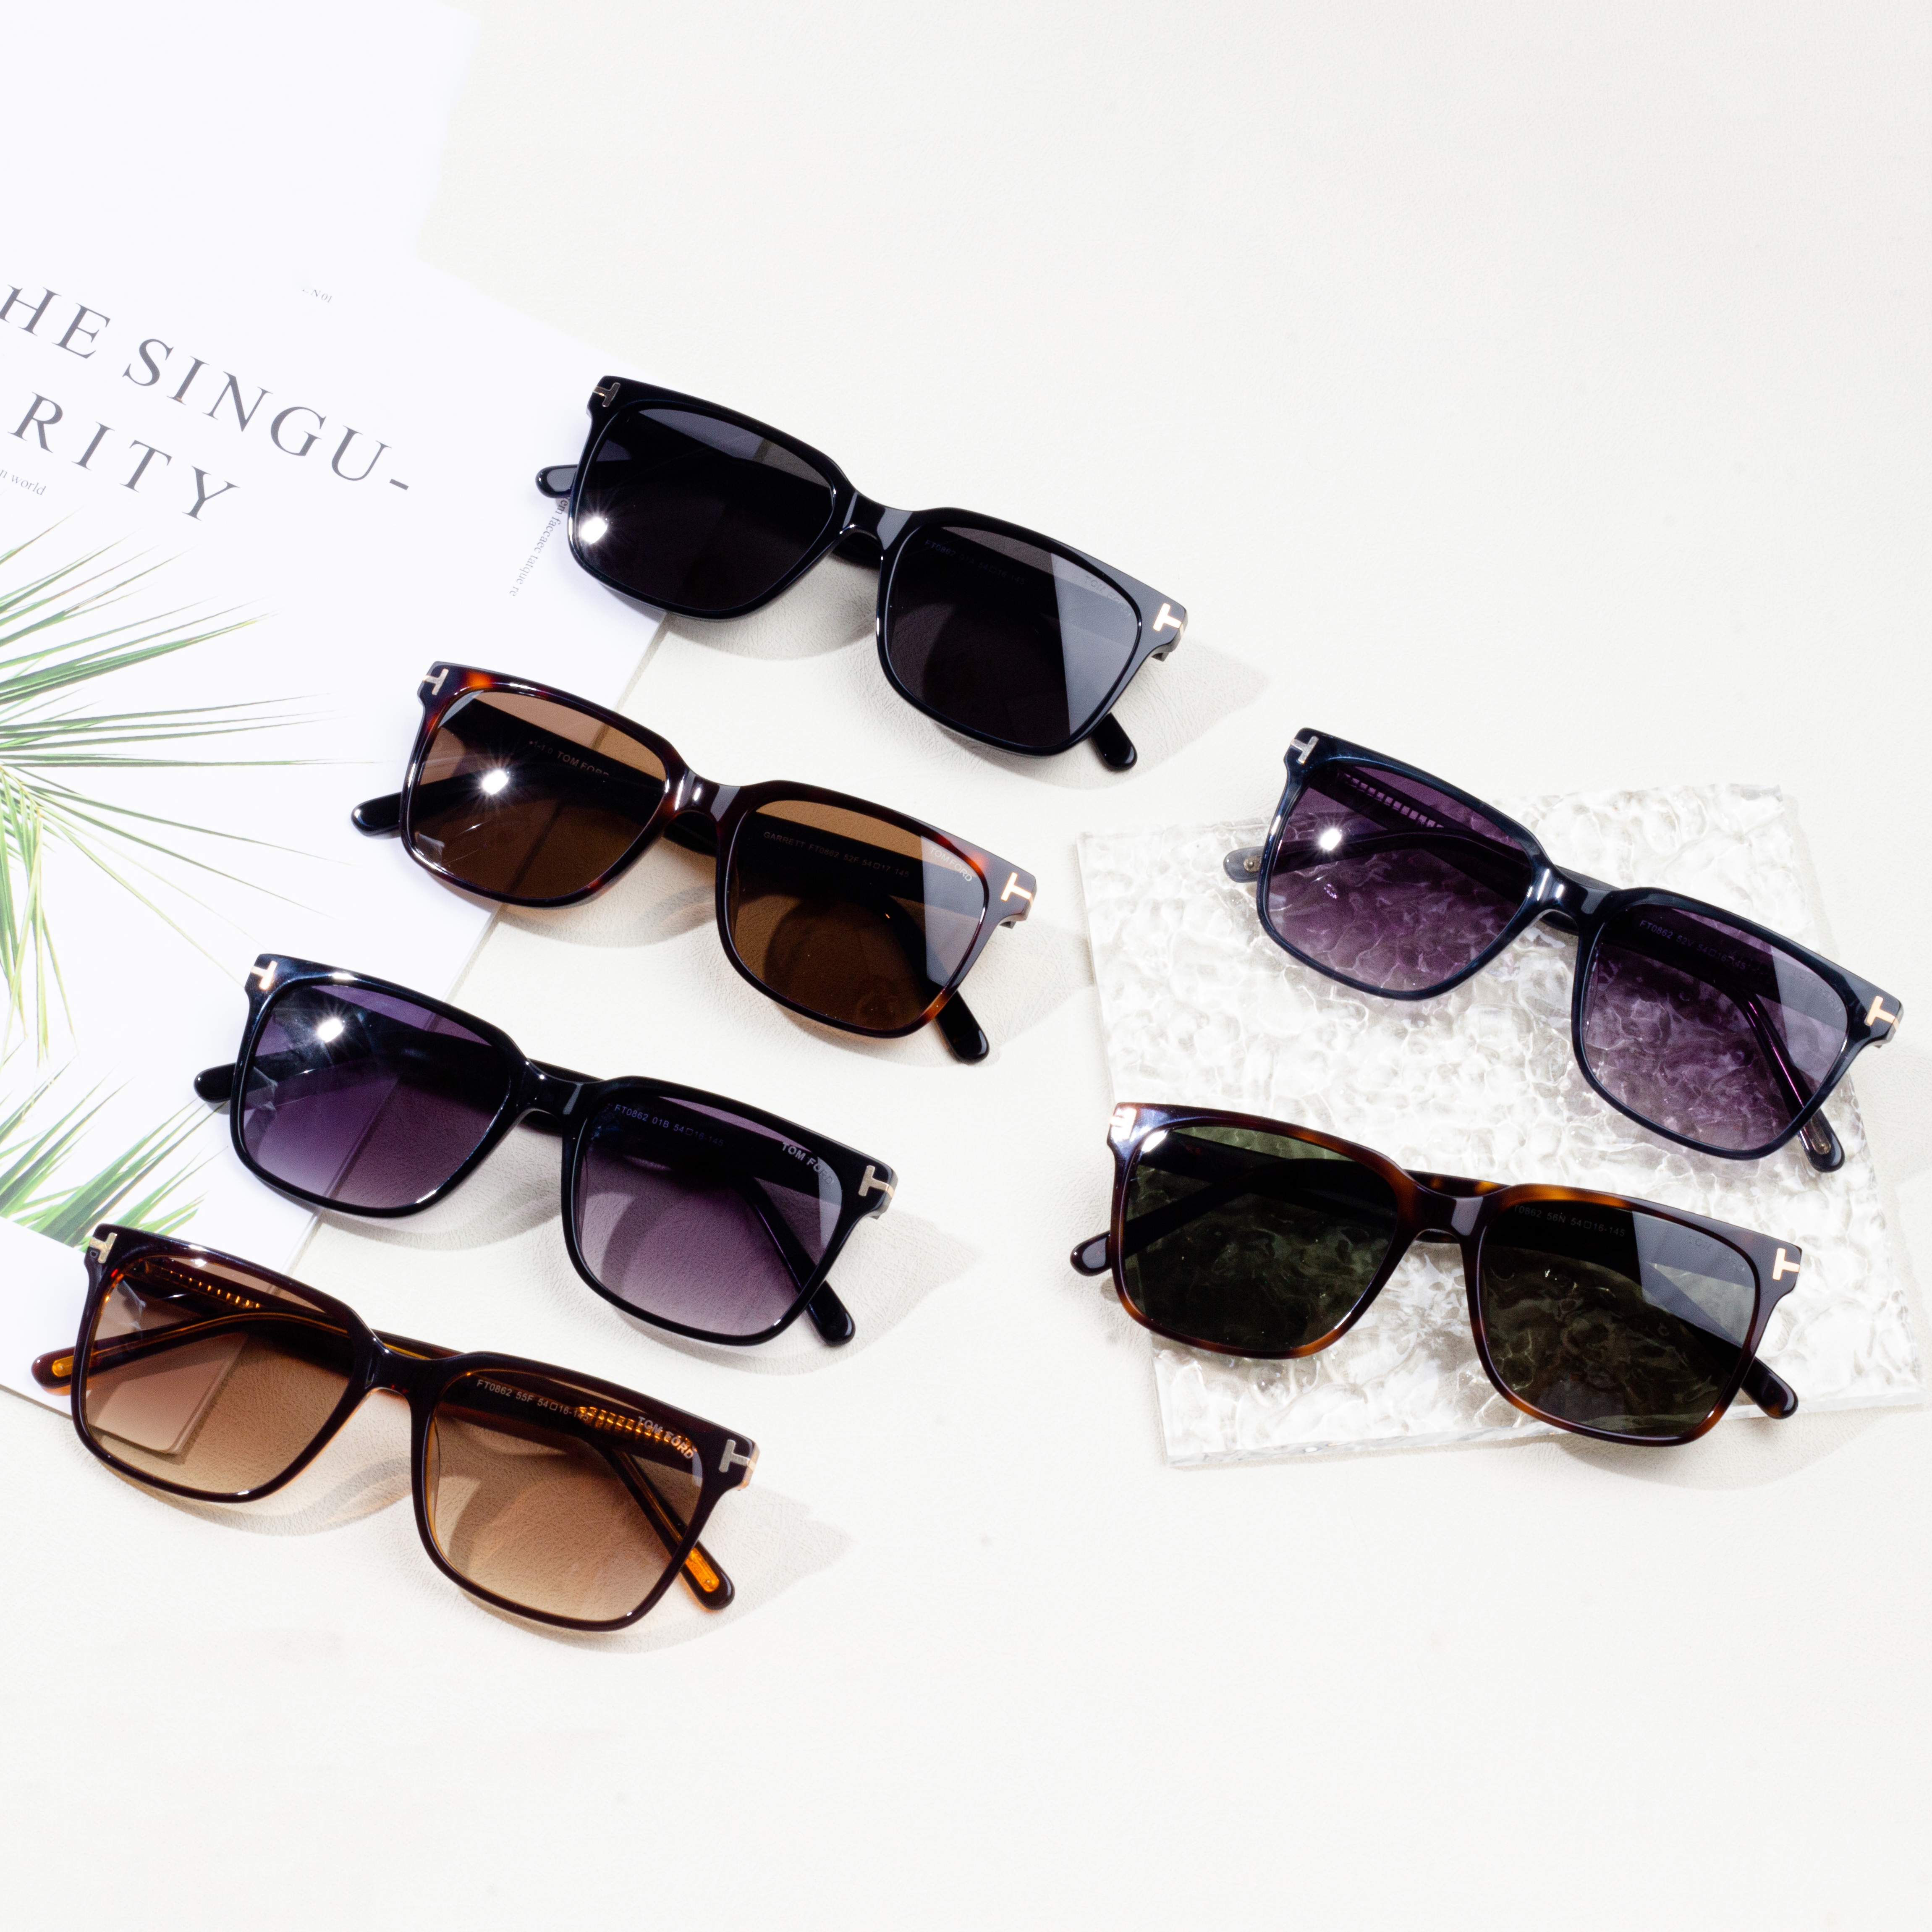 Women Sunglasses Fashion Sunglasses Fashion Sunglasses New Arrival Wholesales